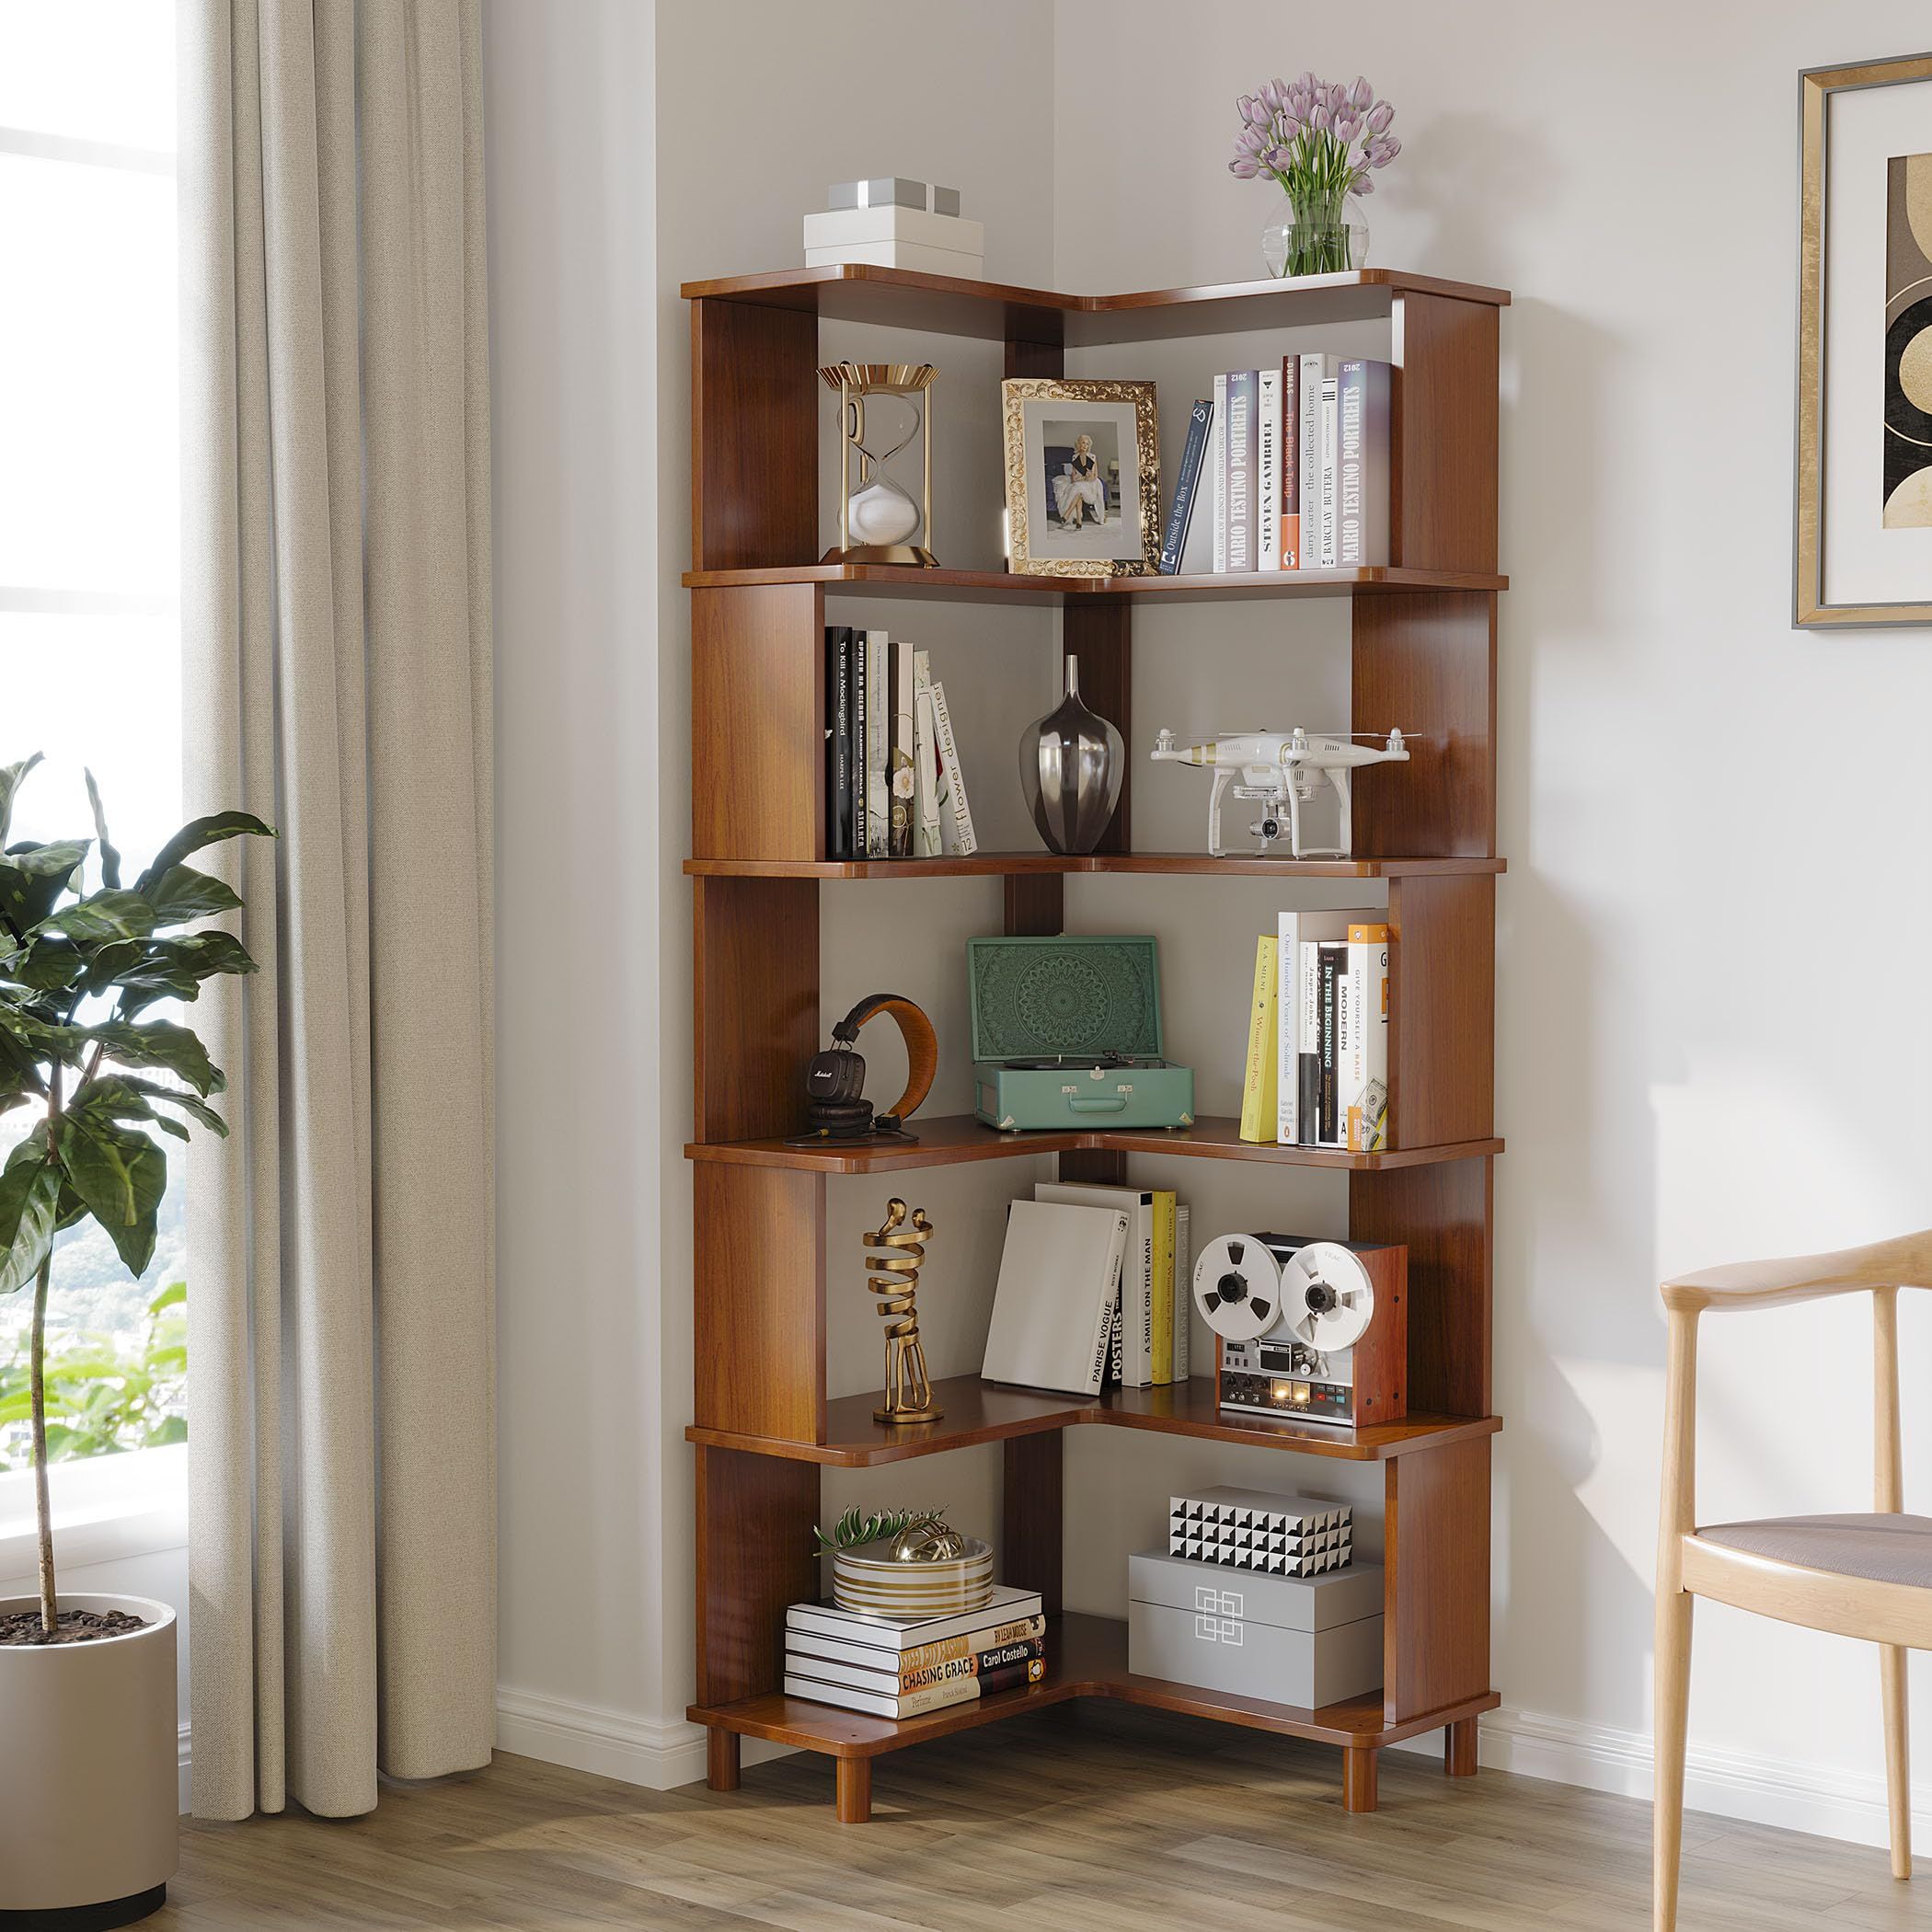 The Beauty of a Corner Bookshelf: A Functional and Stylish Addition to Your Home